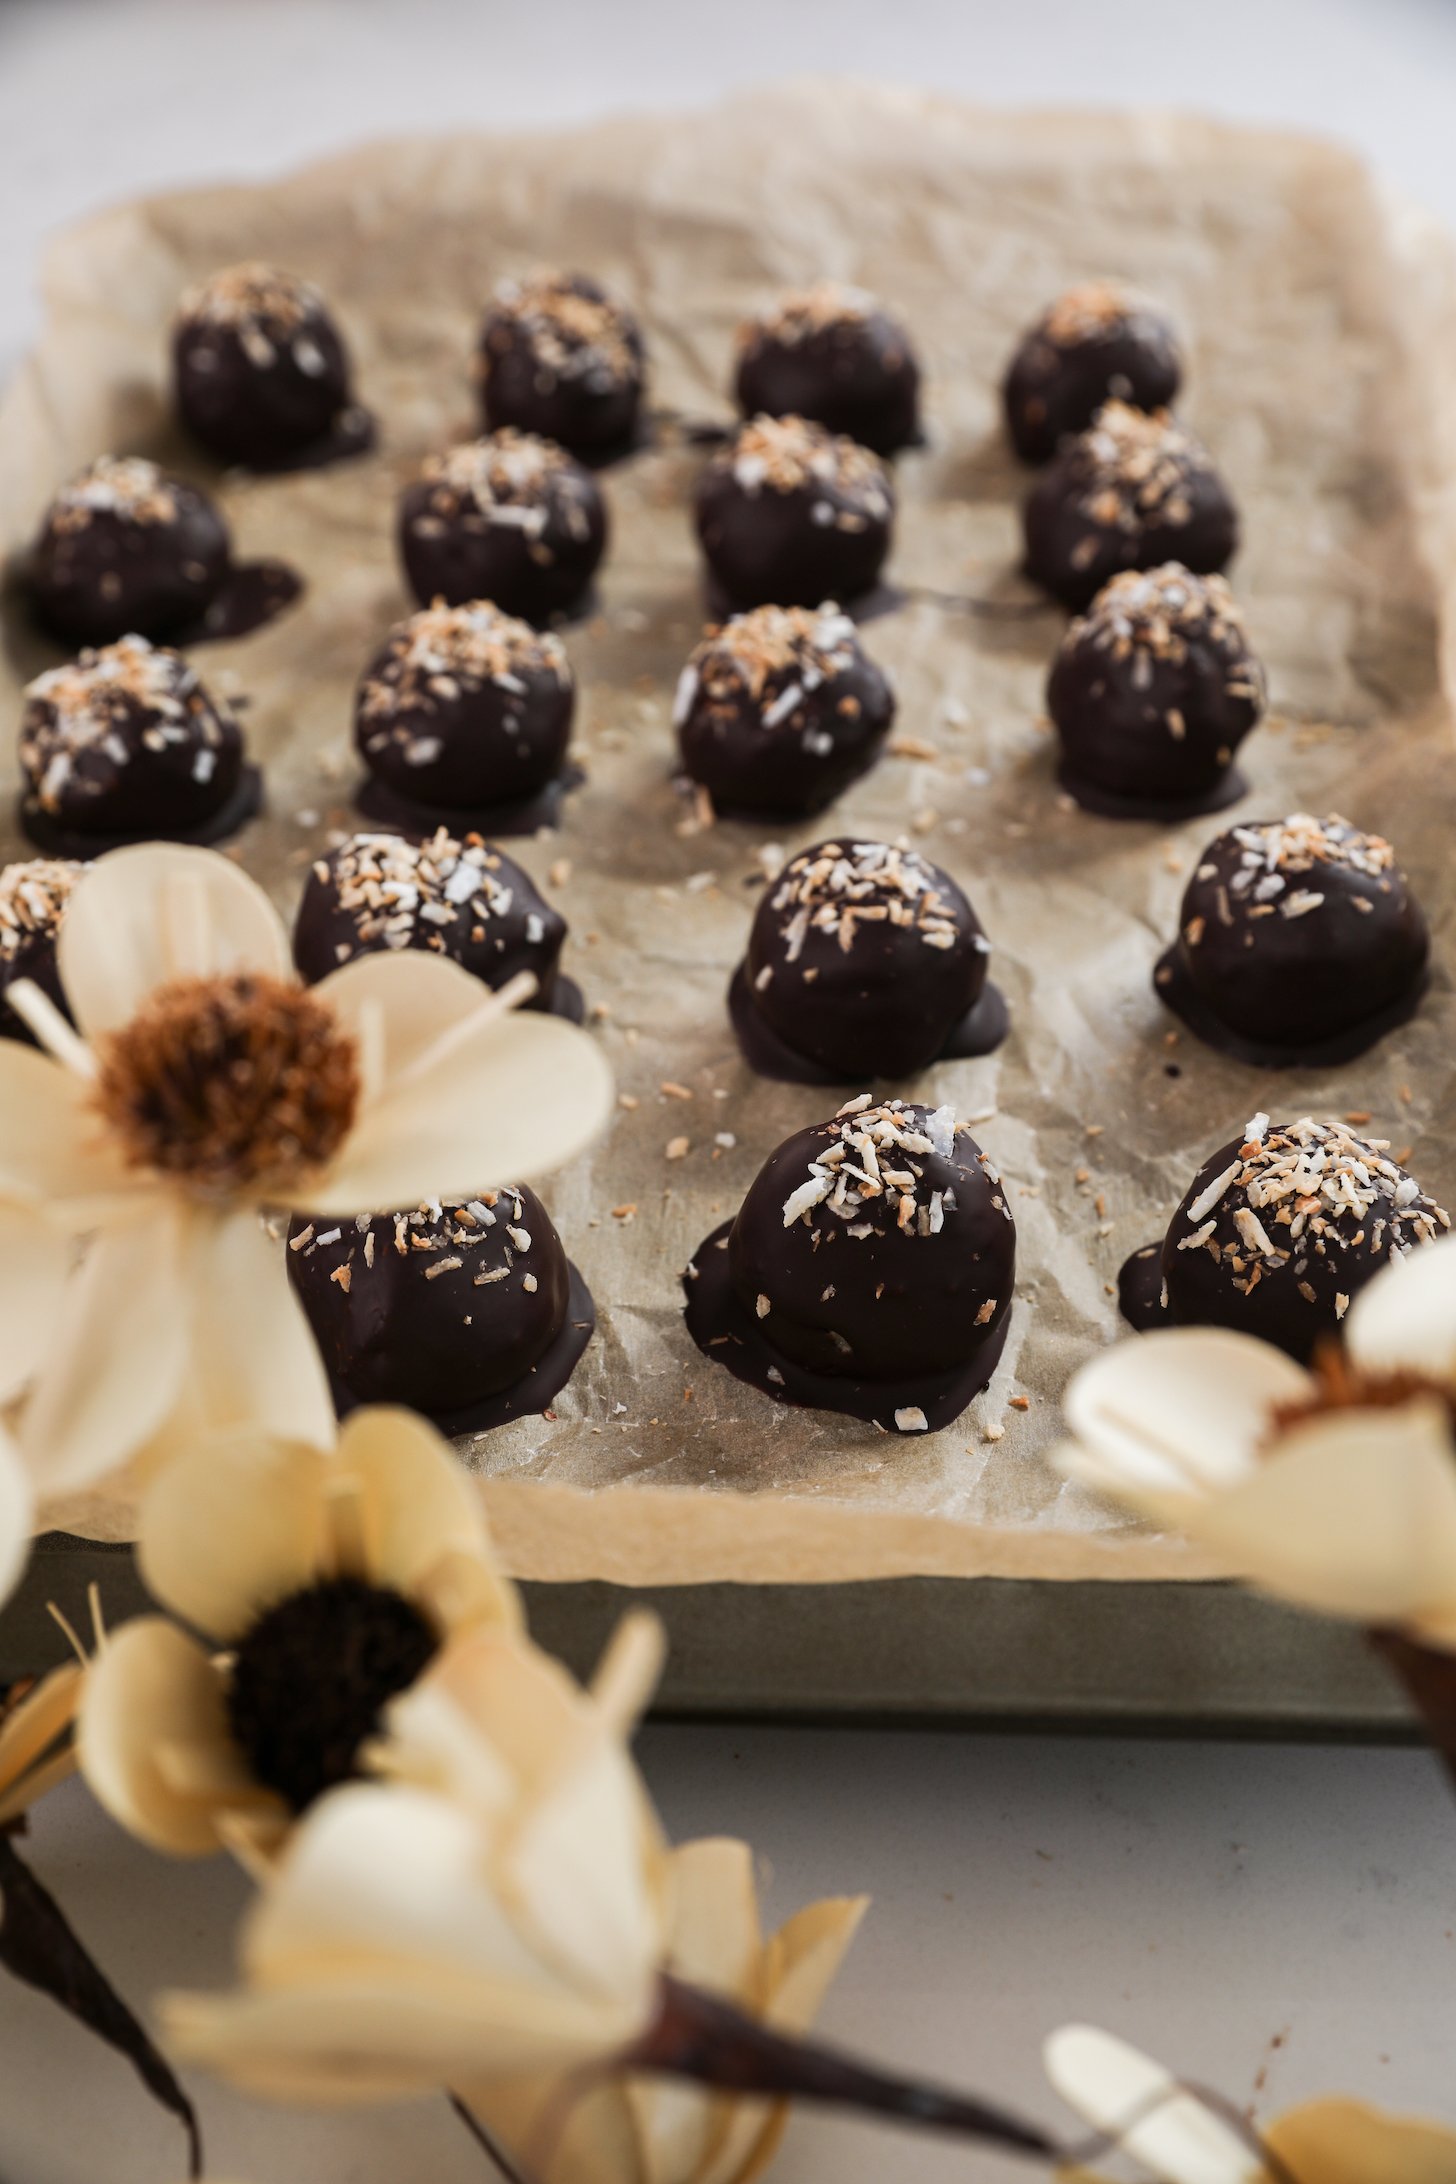 Chocolate-covered balls adorned with shredded coconut, elegantly placed on a parchment paper-lined baking sheet, with delicate flowers in the foreground.